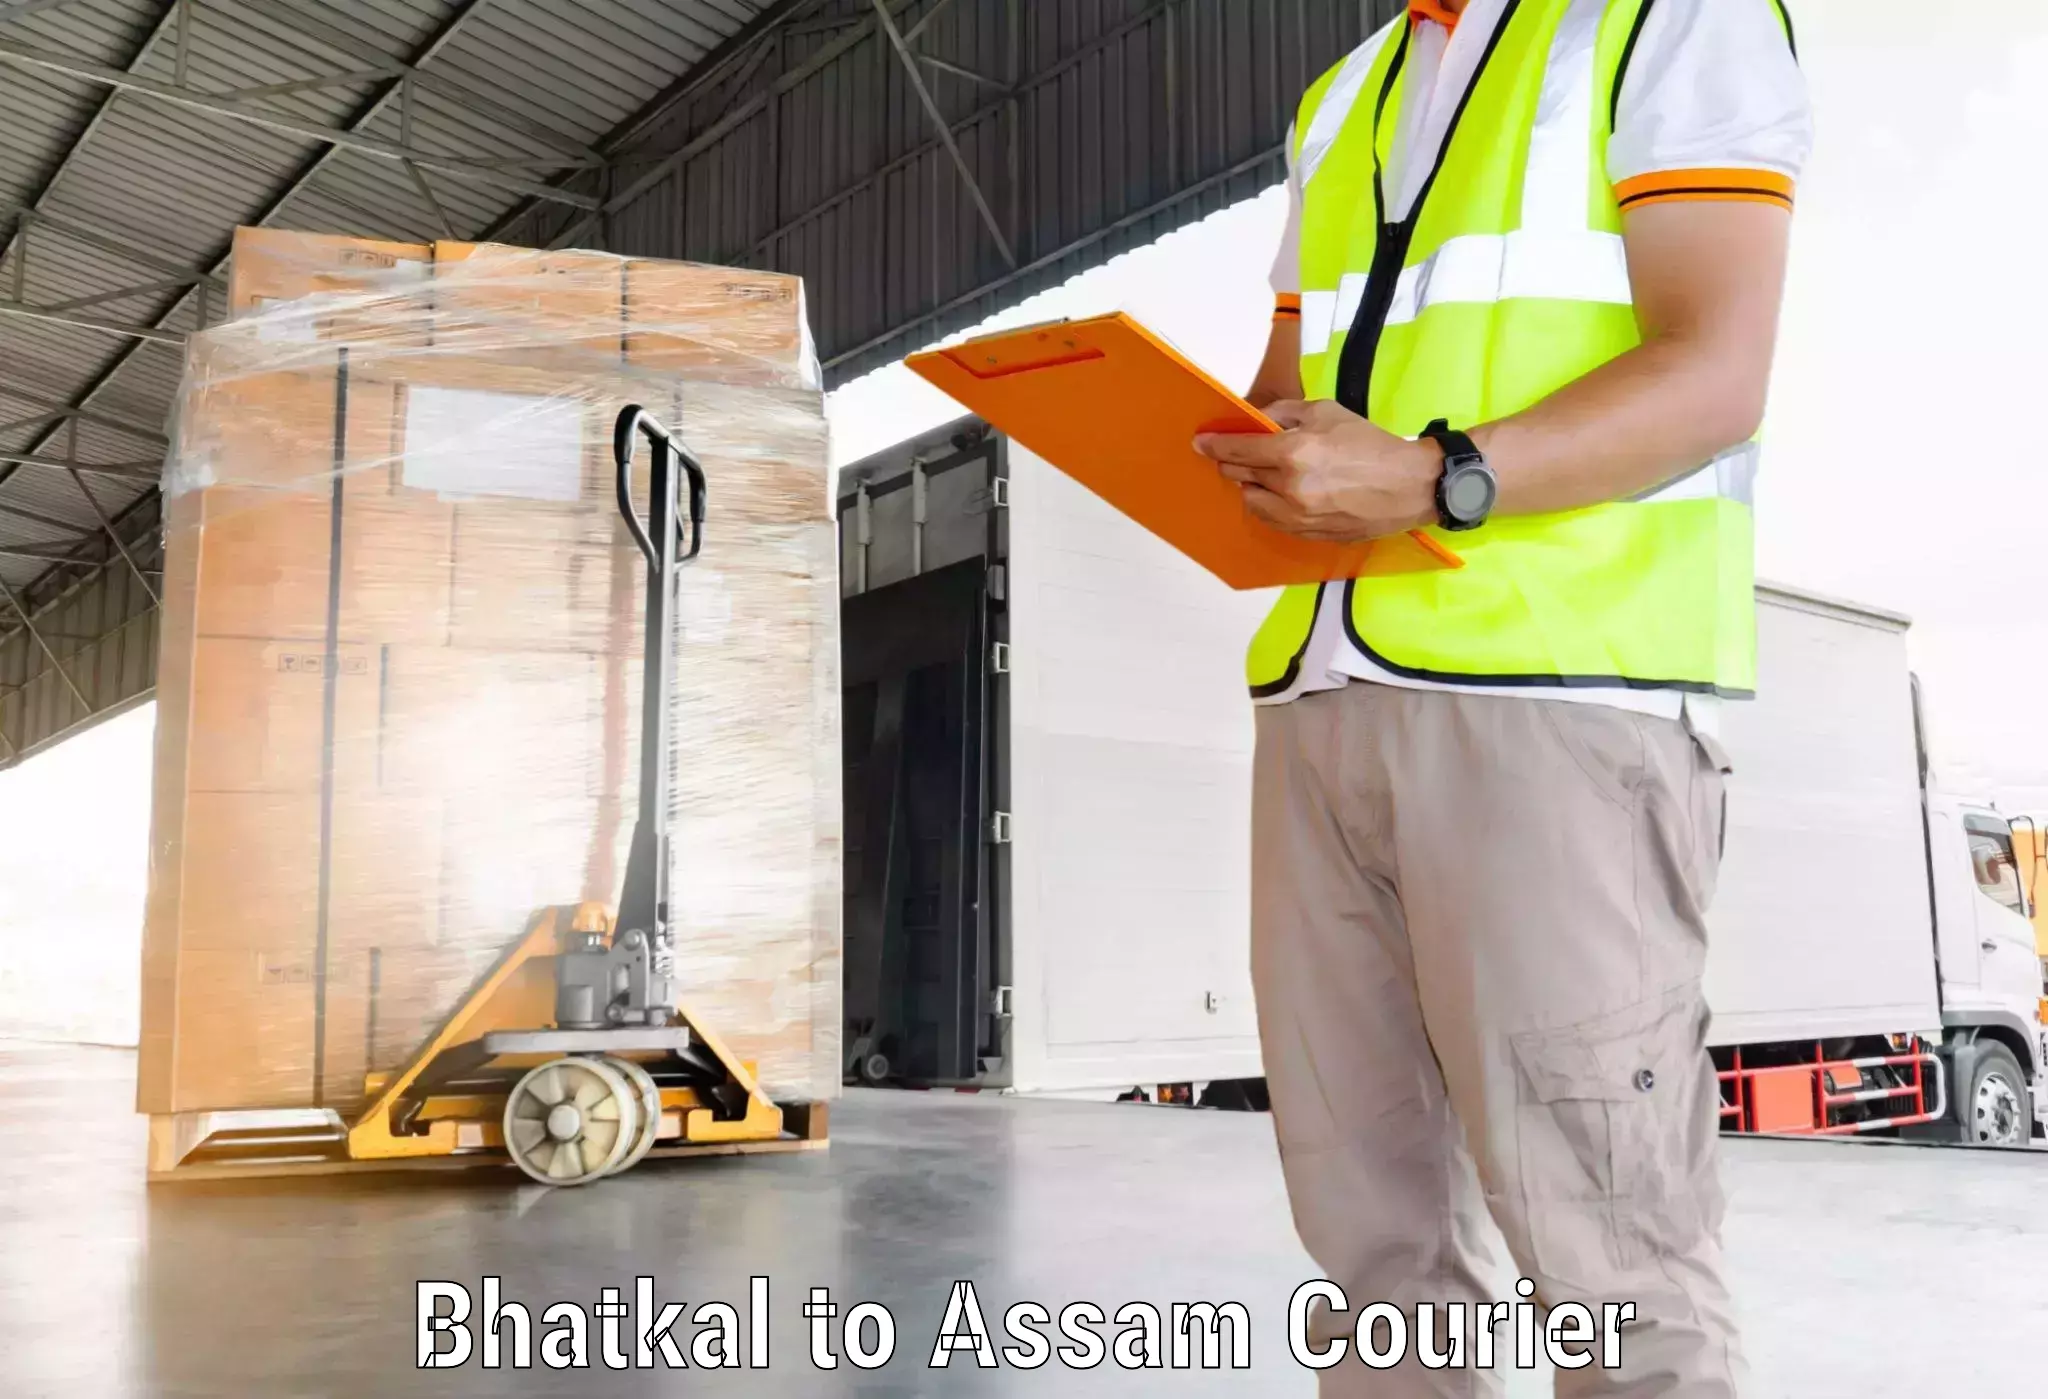 Rapid shipping services Bhatkal to Nagaon